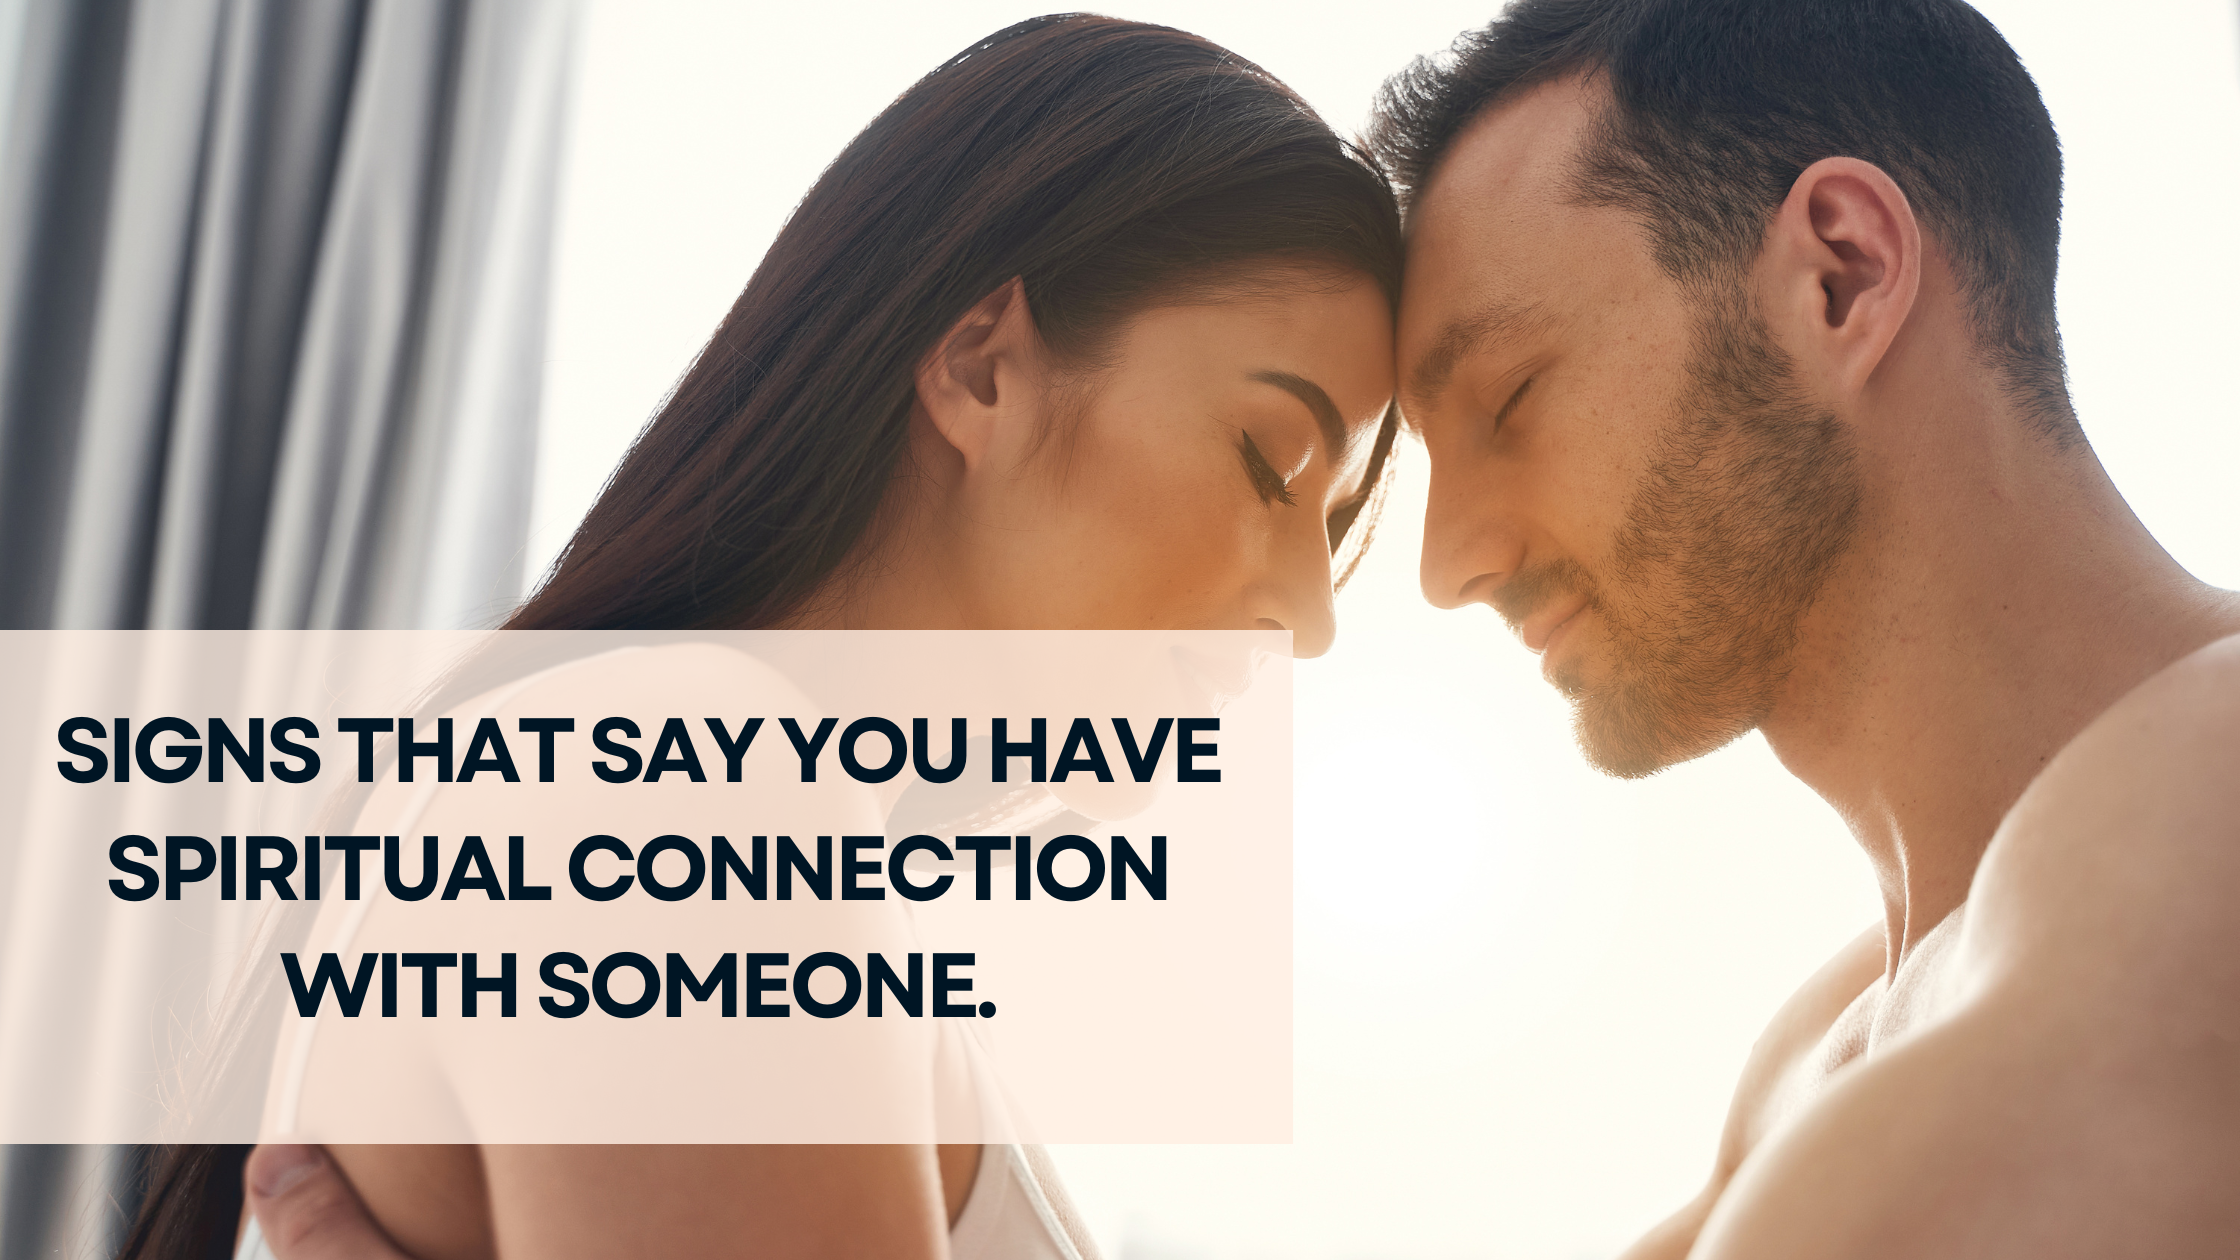 Signs that say you have spiritual connection with someone